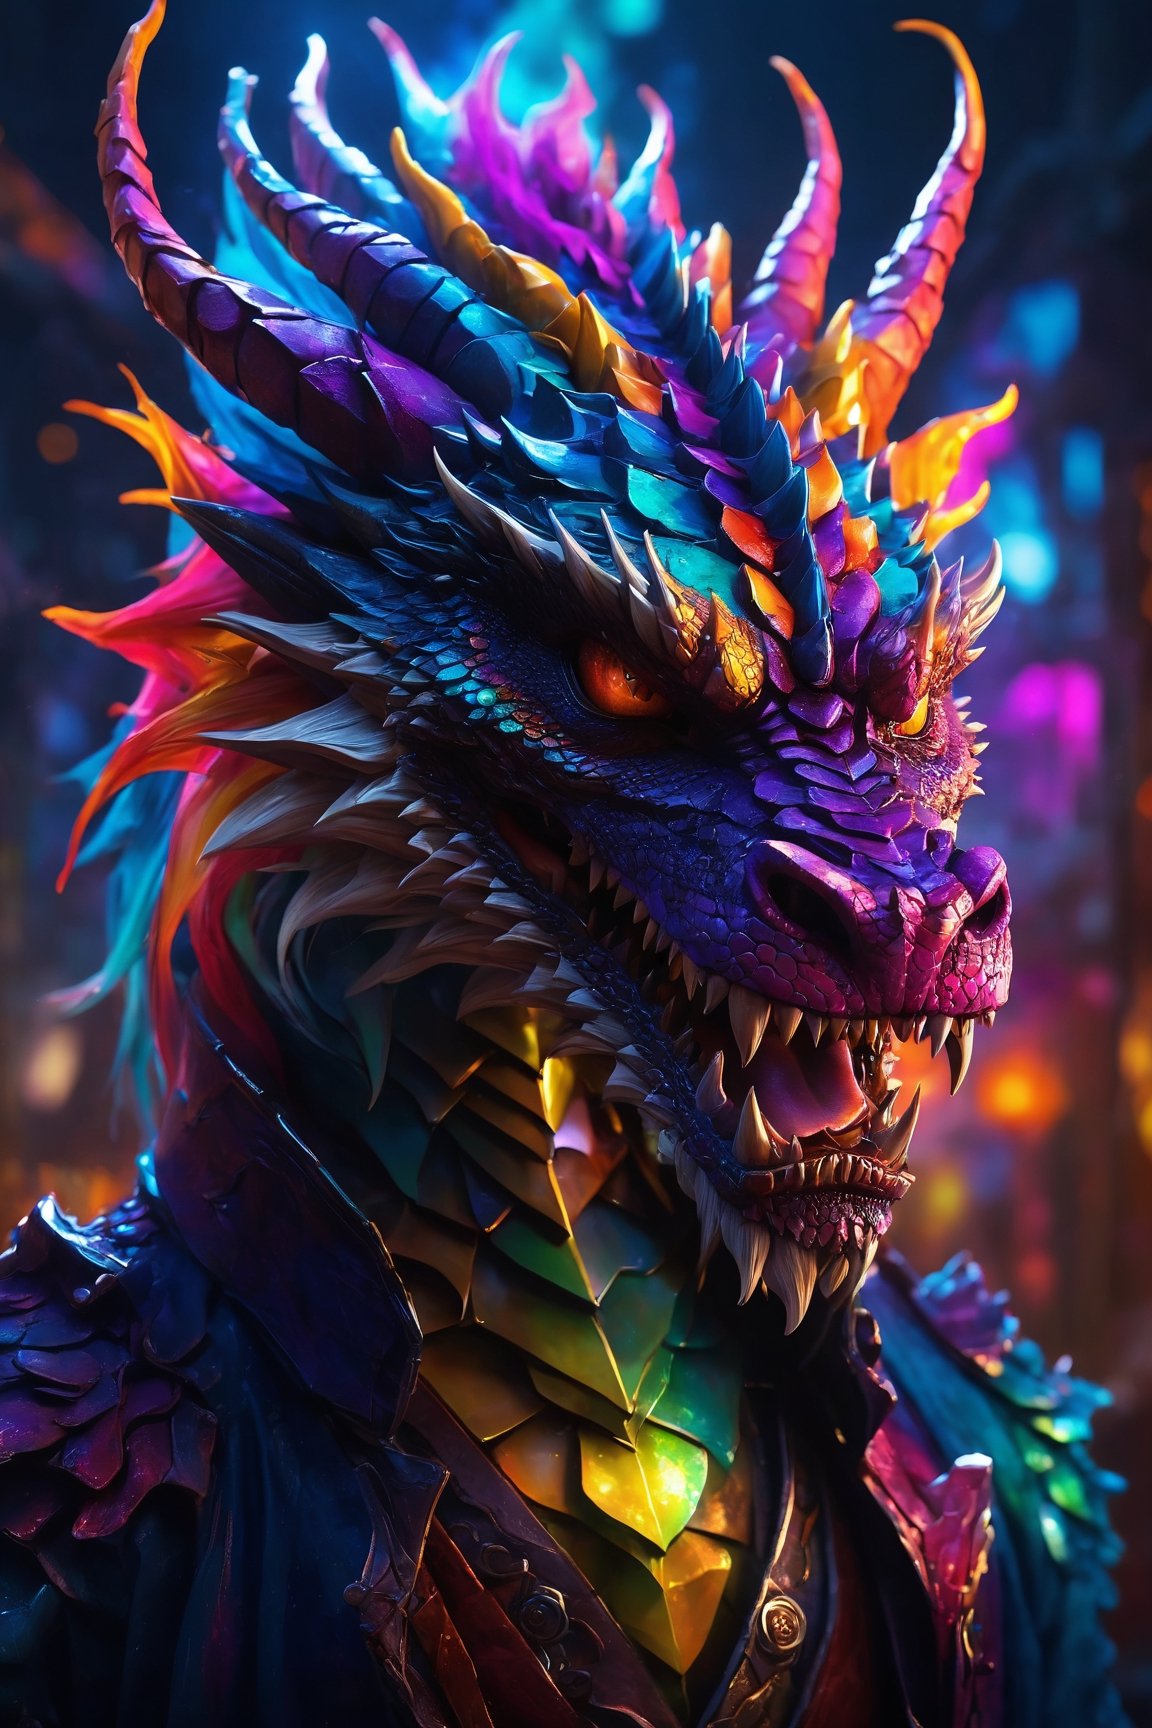 AiArtV, Dragon, (best quality, 8K, highres, masterpiece), ultra-detailed, (photorealistic, cinematic), illustration painting of a luminous and enchanting bad guy undead/human-like creature with vibrant and dynamic anime-style colors. The creature, with dark, colorful hair, strikes a dynamic pose in a brilliantly lit fantasy realm environment filled with a kaleidoscope of colors. The mid-shot composition and rule of thirds depth of field emphasize intricate details, creating a fantastical realm that bursts with subtle and vibrant colors. The use of light particles enhances the scene's grandeur and awe, making it a stunning visual masterpiece in a double-exposure style. The strong outlines contribute to the scene's cinematic feel, creating a super colorful and visually captivating narrative